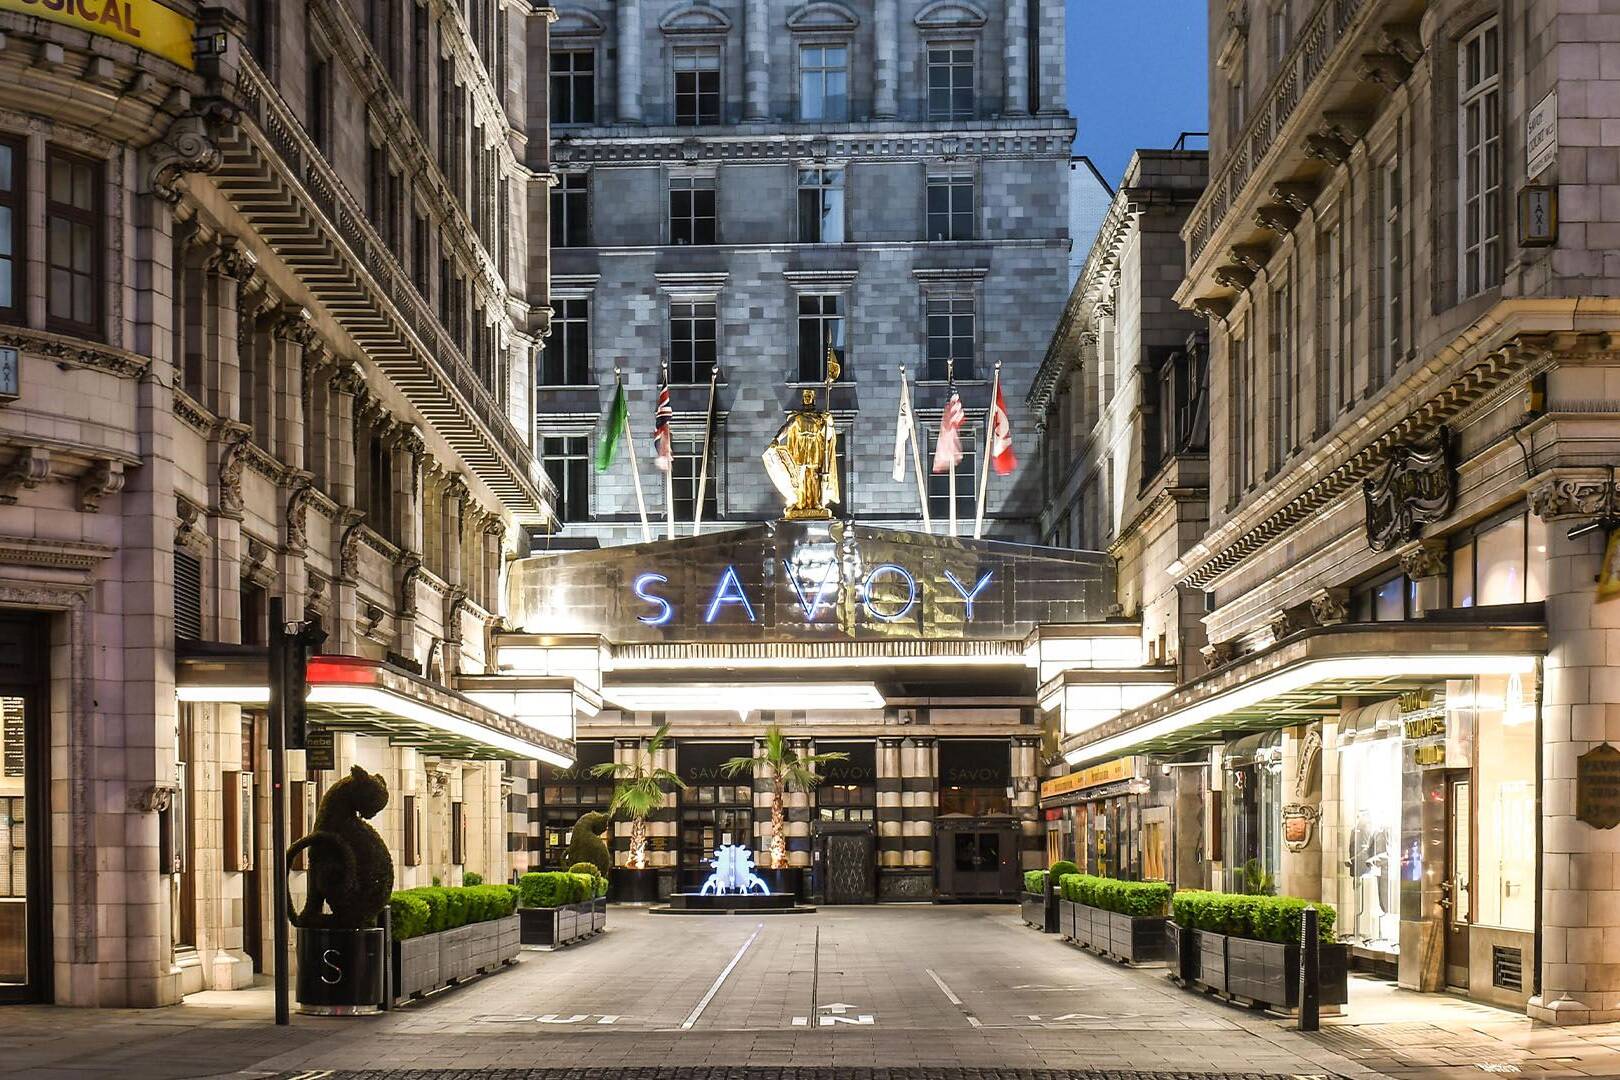 The savoy hotel in london at dusk.